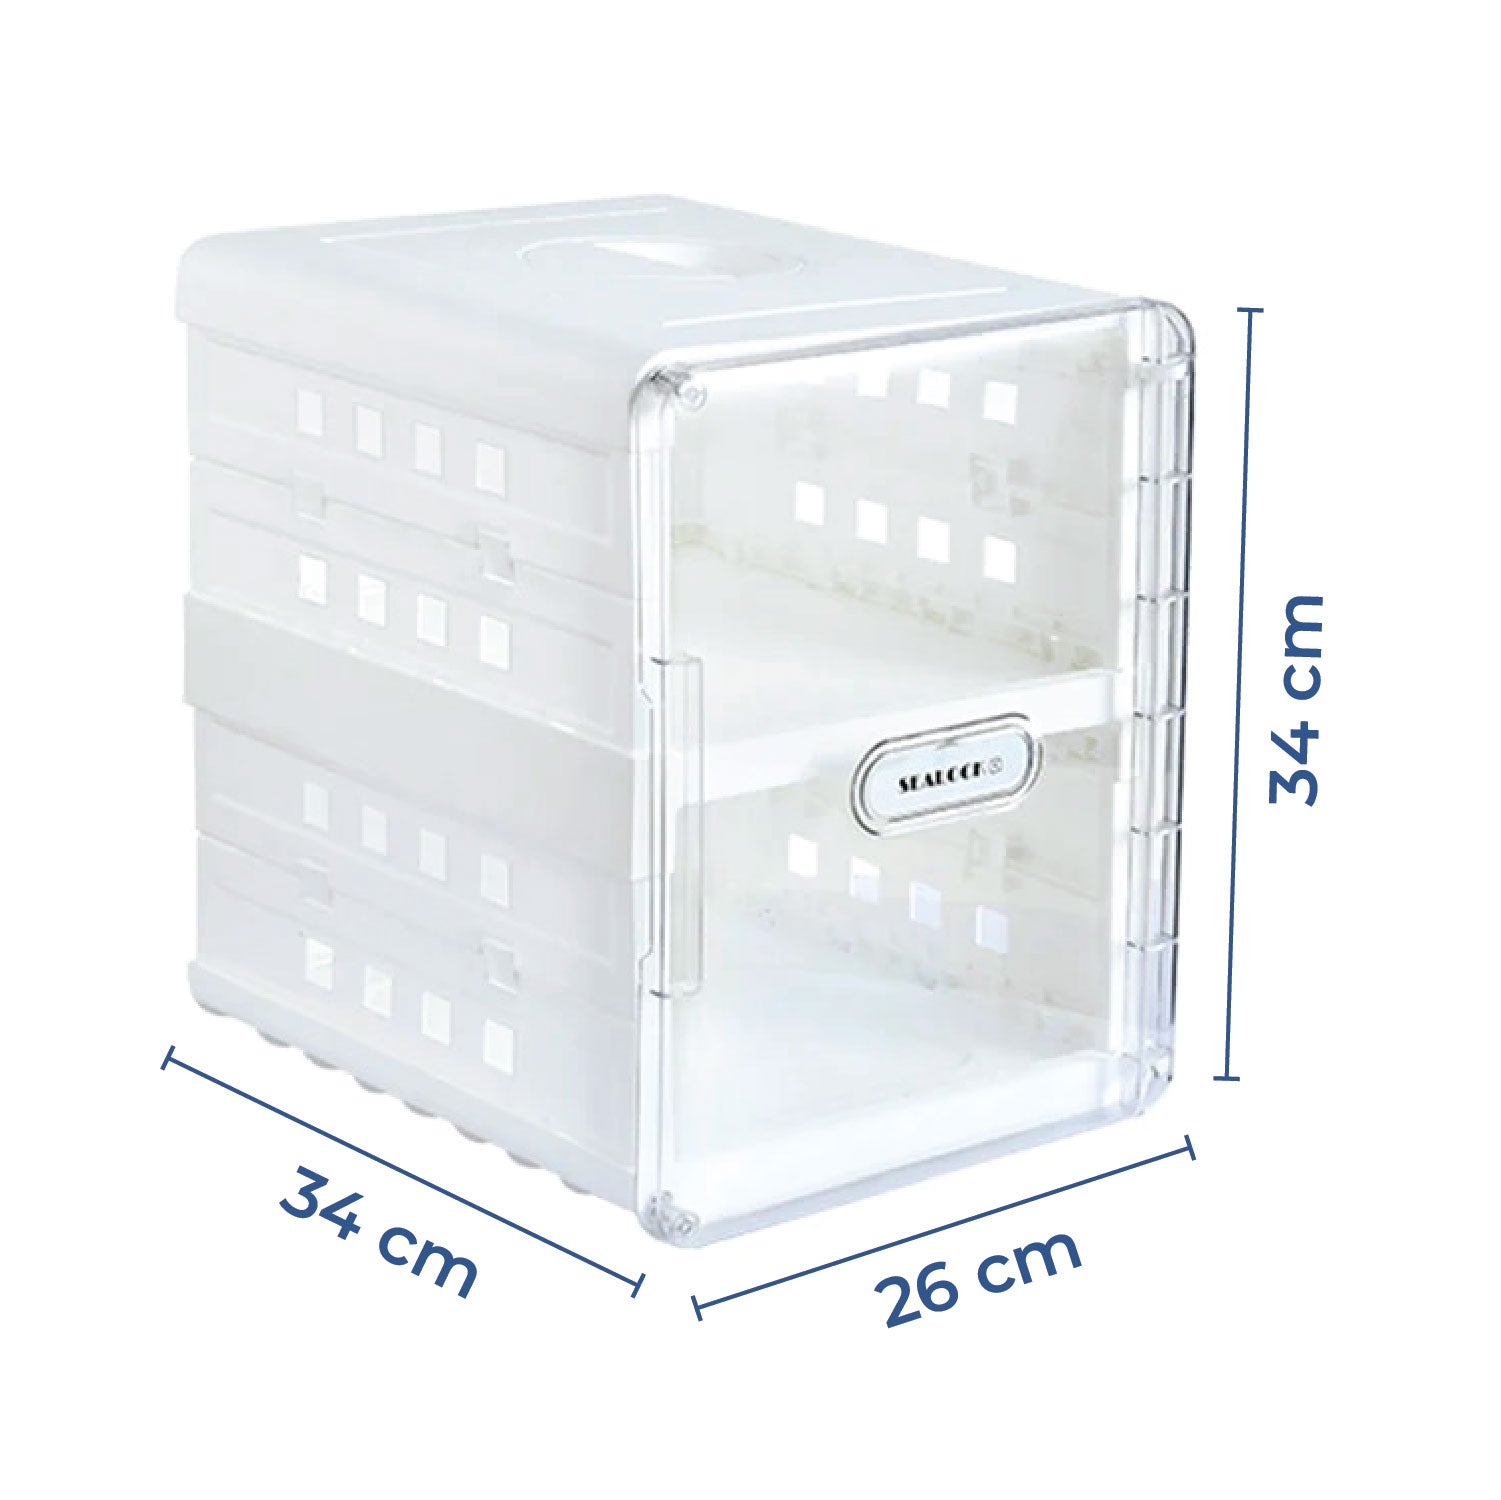 2 Tier Shoe Storage Box / Transparent Storage Basket With Door / Shoe Stash with Air Passing Holes and Handle